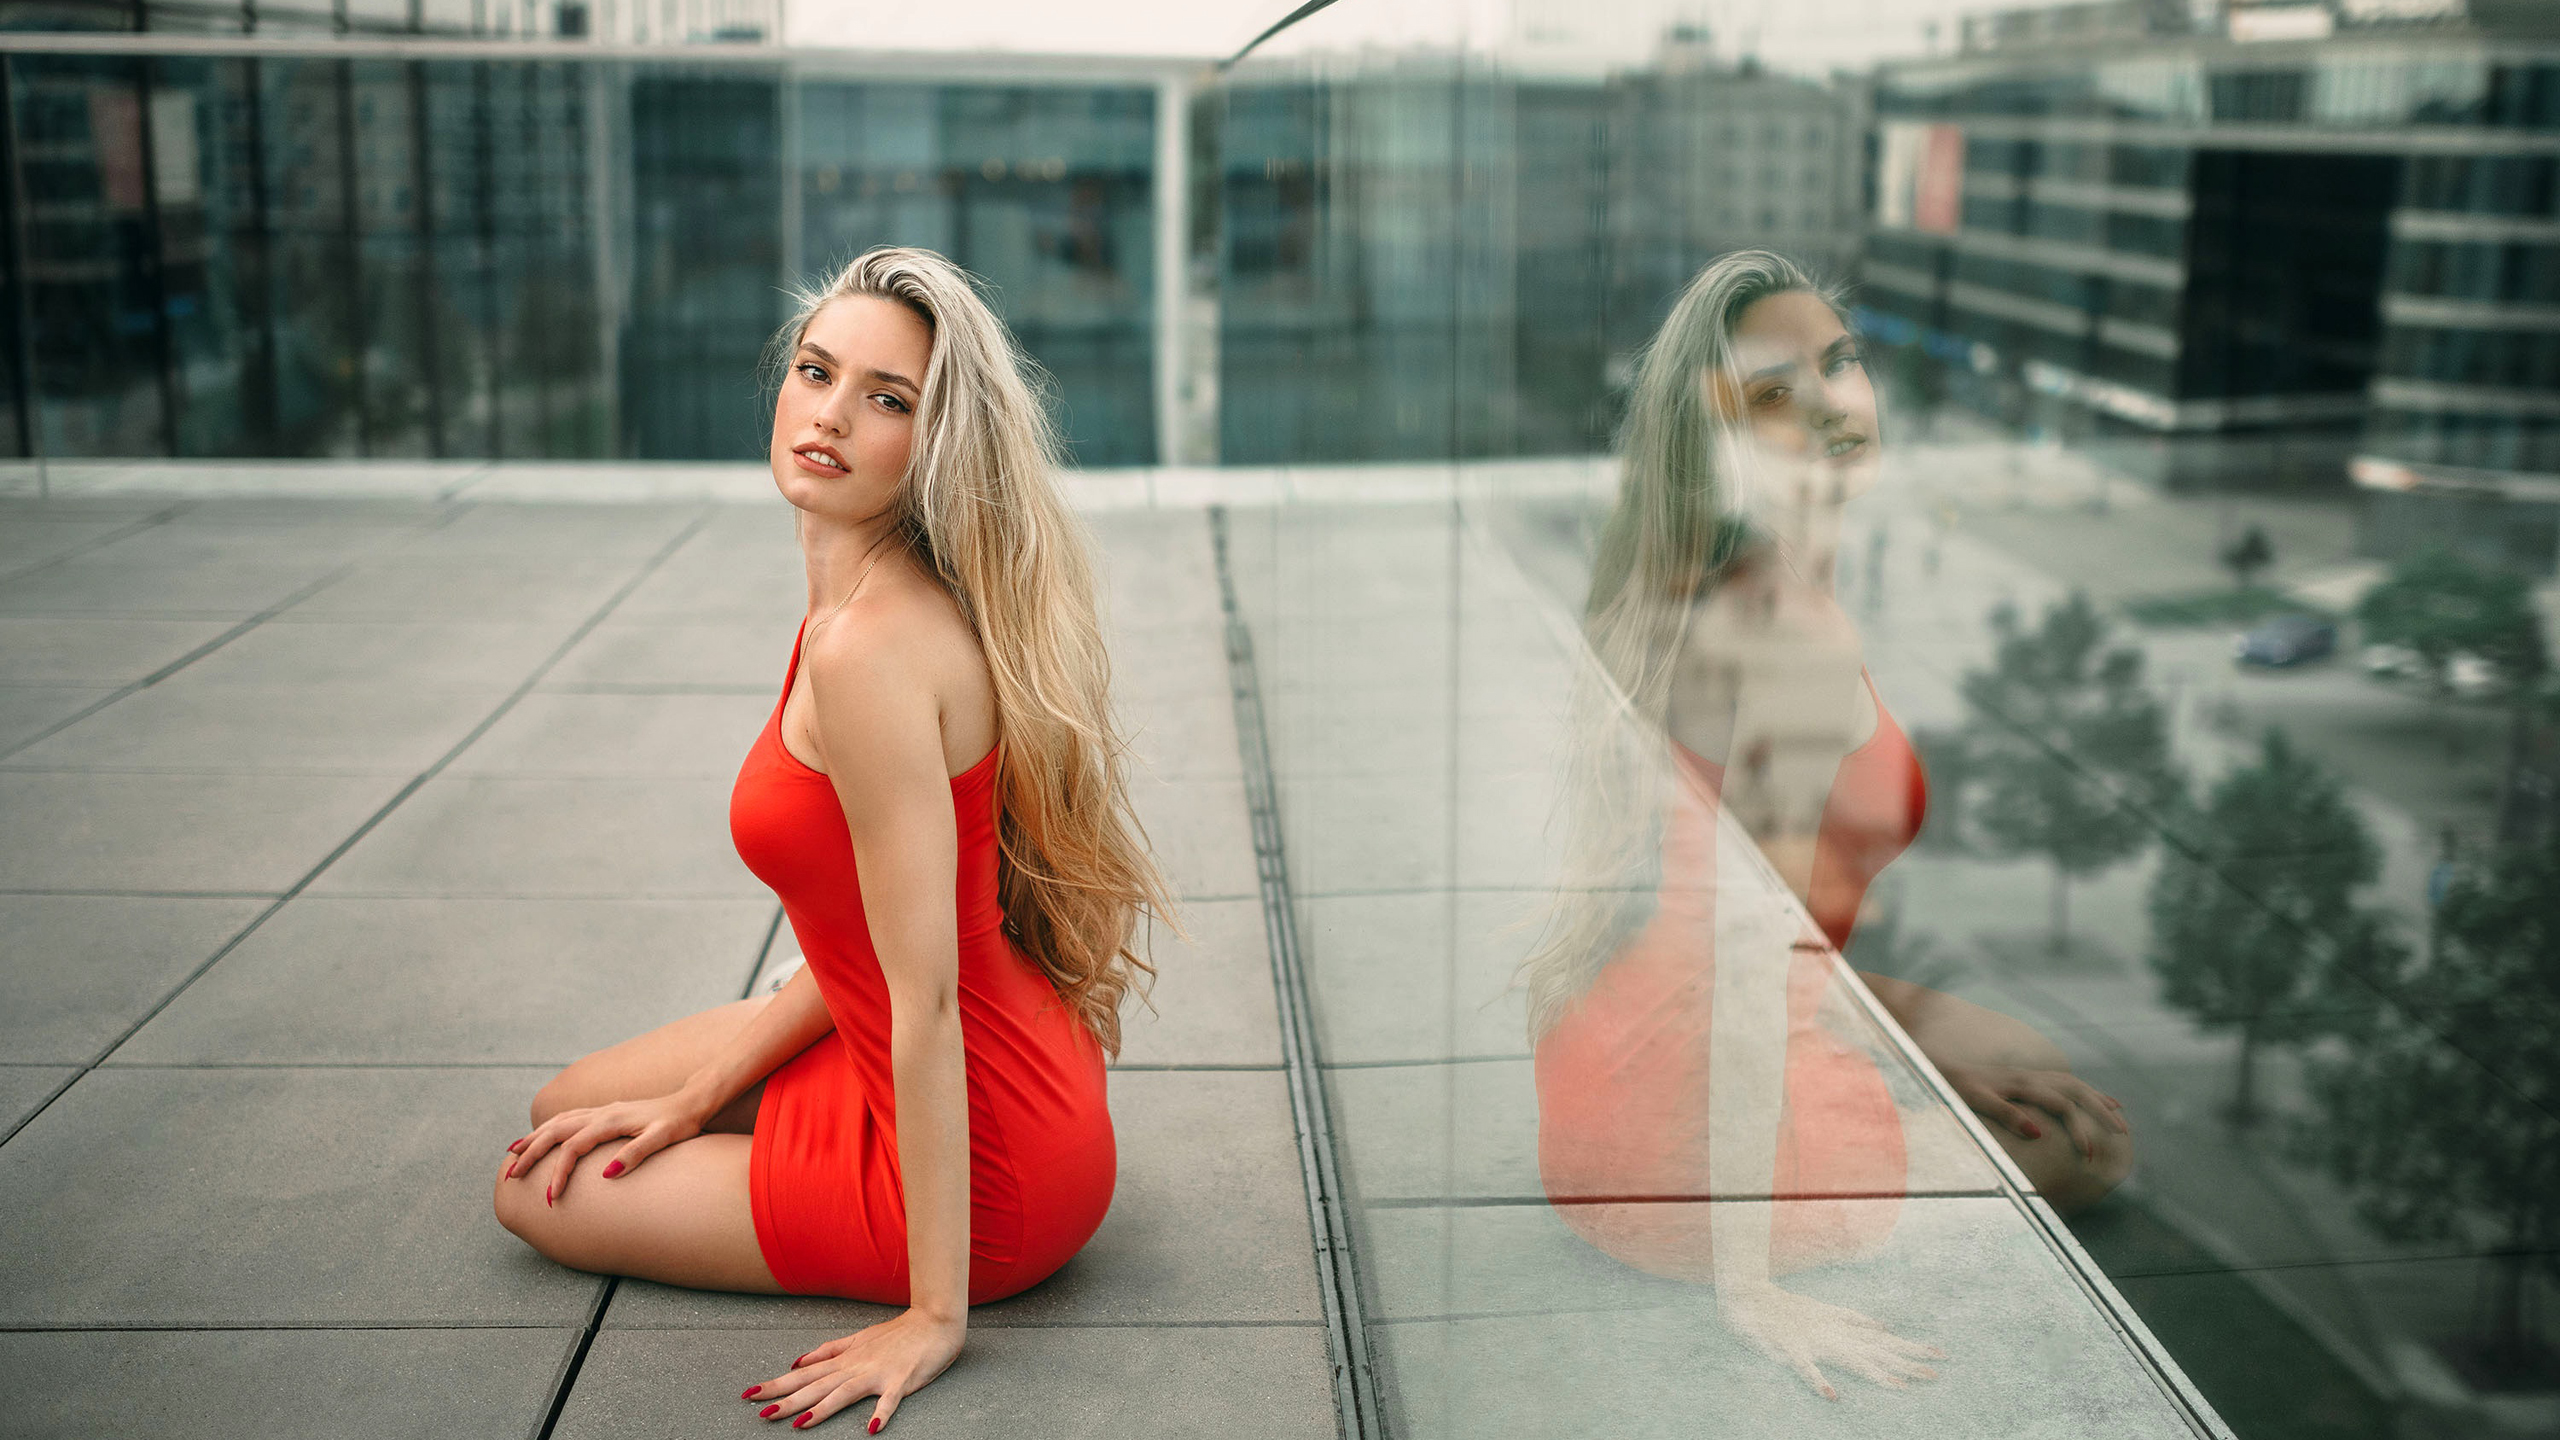 Girl Model With Red Dress And Blonde Hair Is Sitting With Reflection On Glass